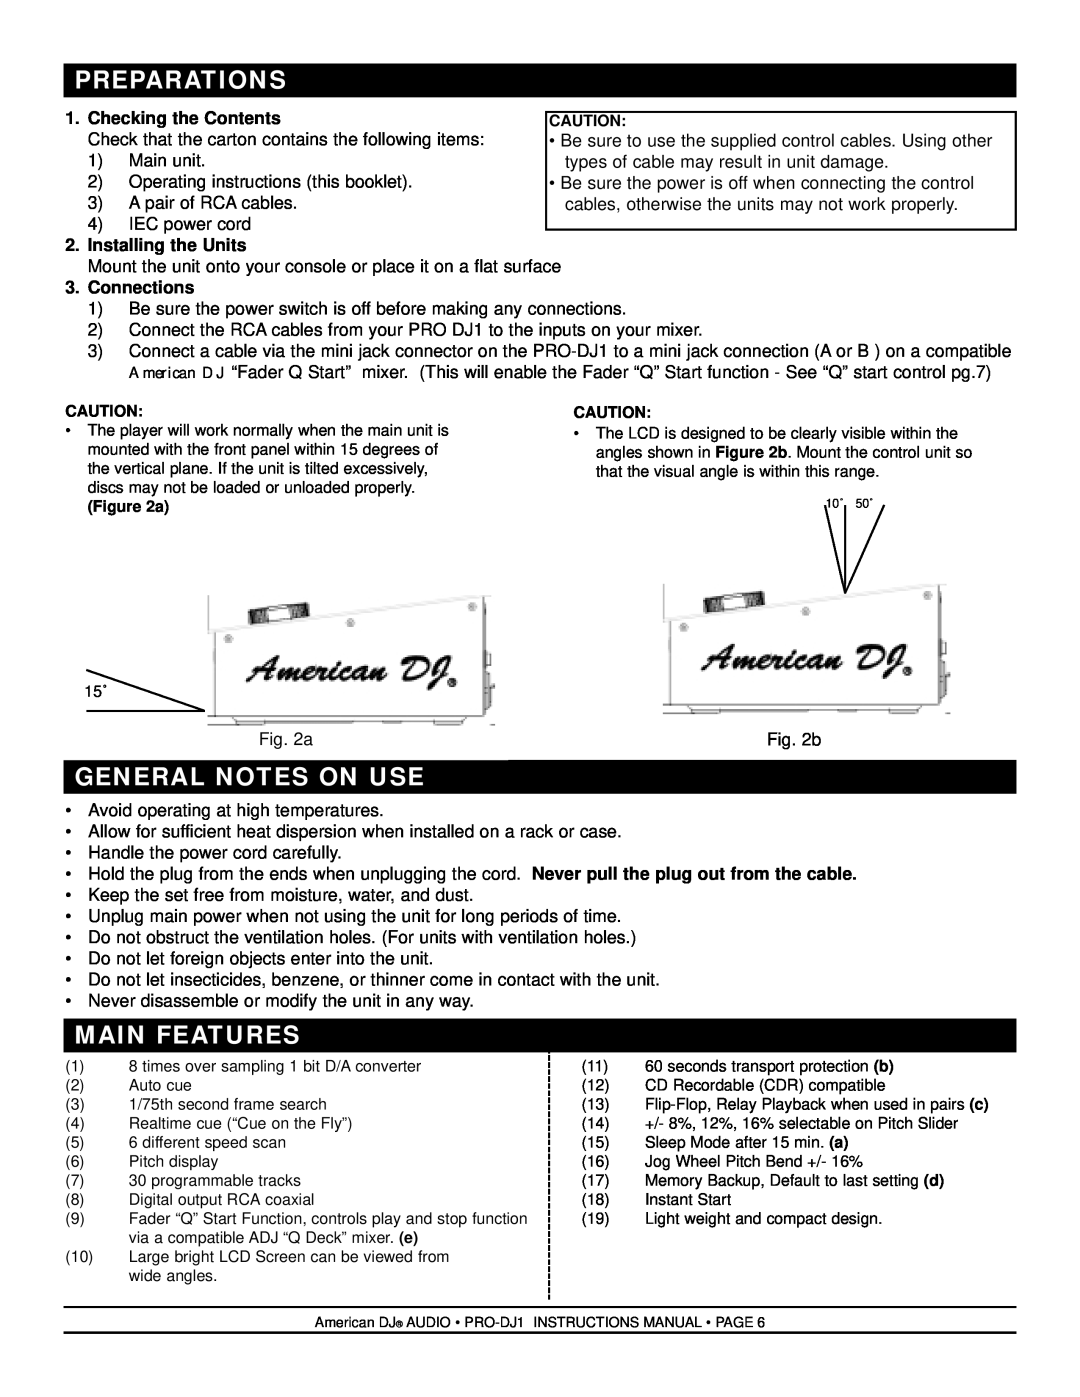 American DJ PRO-DJ1 manual Preparations, General Notes On Use, Main Features, Checking the Contents, Installing the Units 